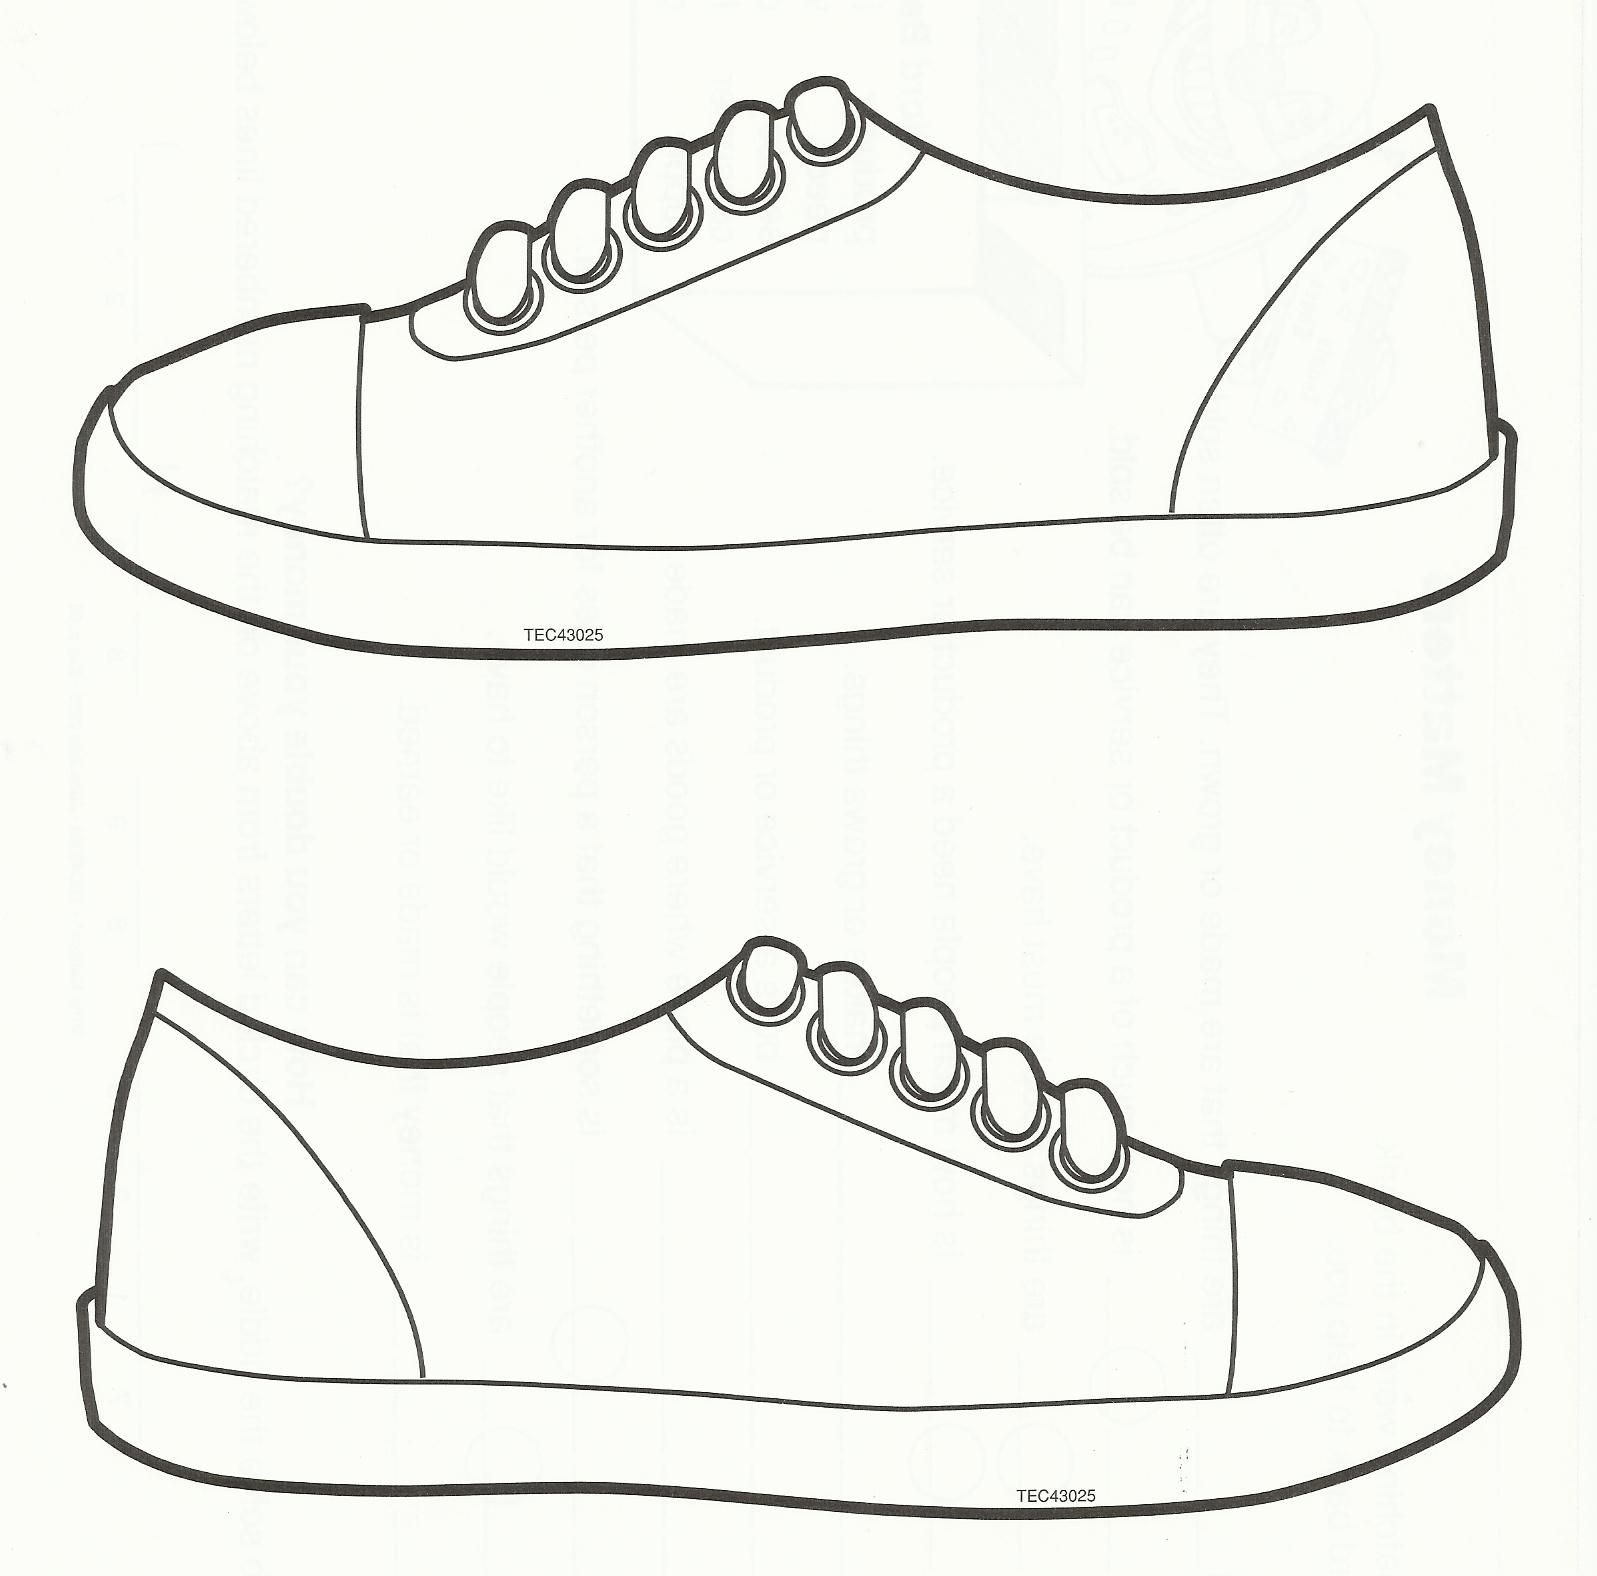 Sneaker Art Shoe Template Design Your Own Shoes